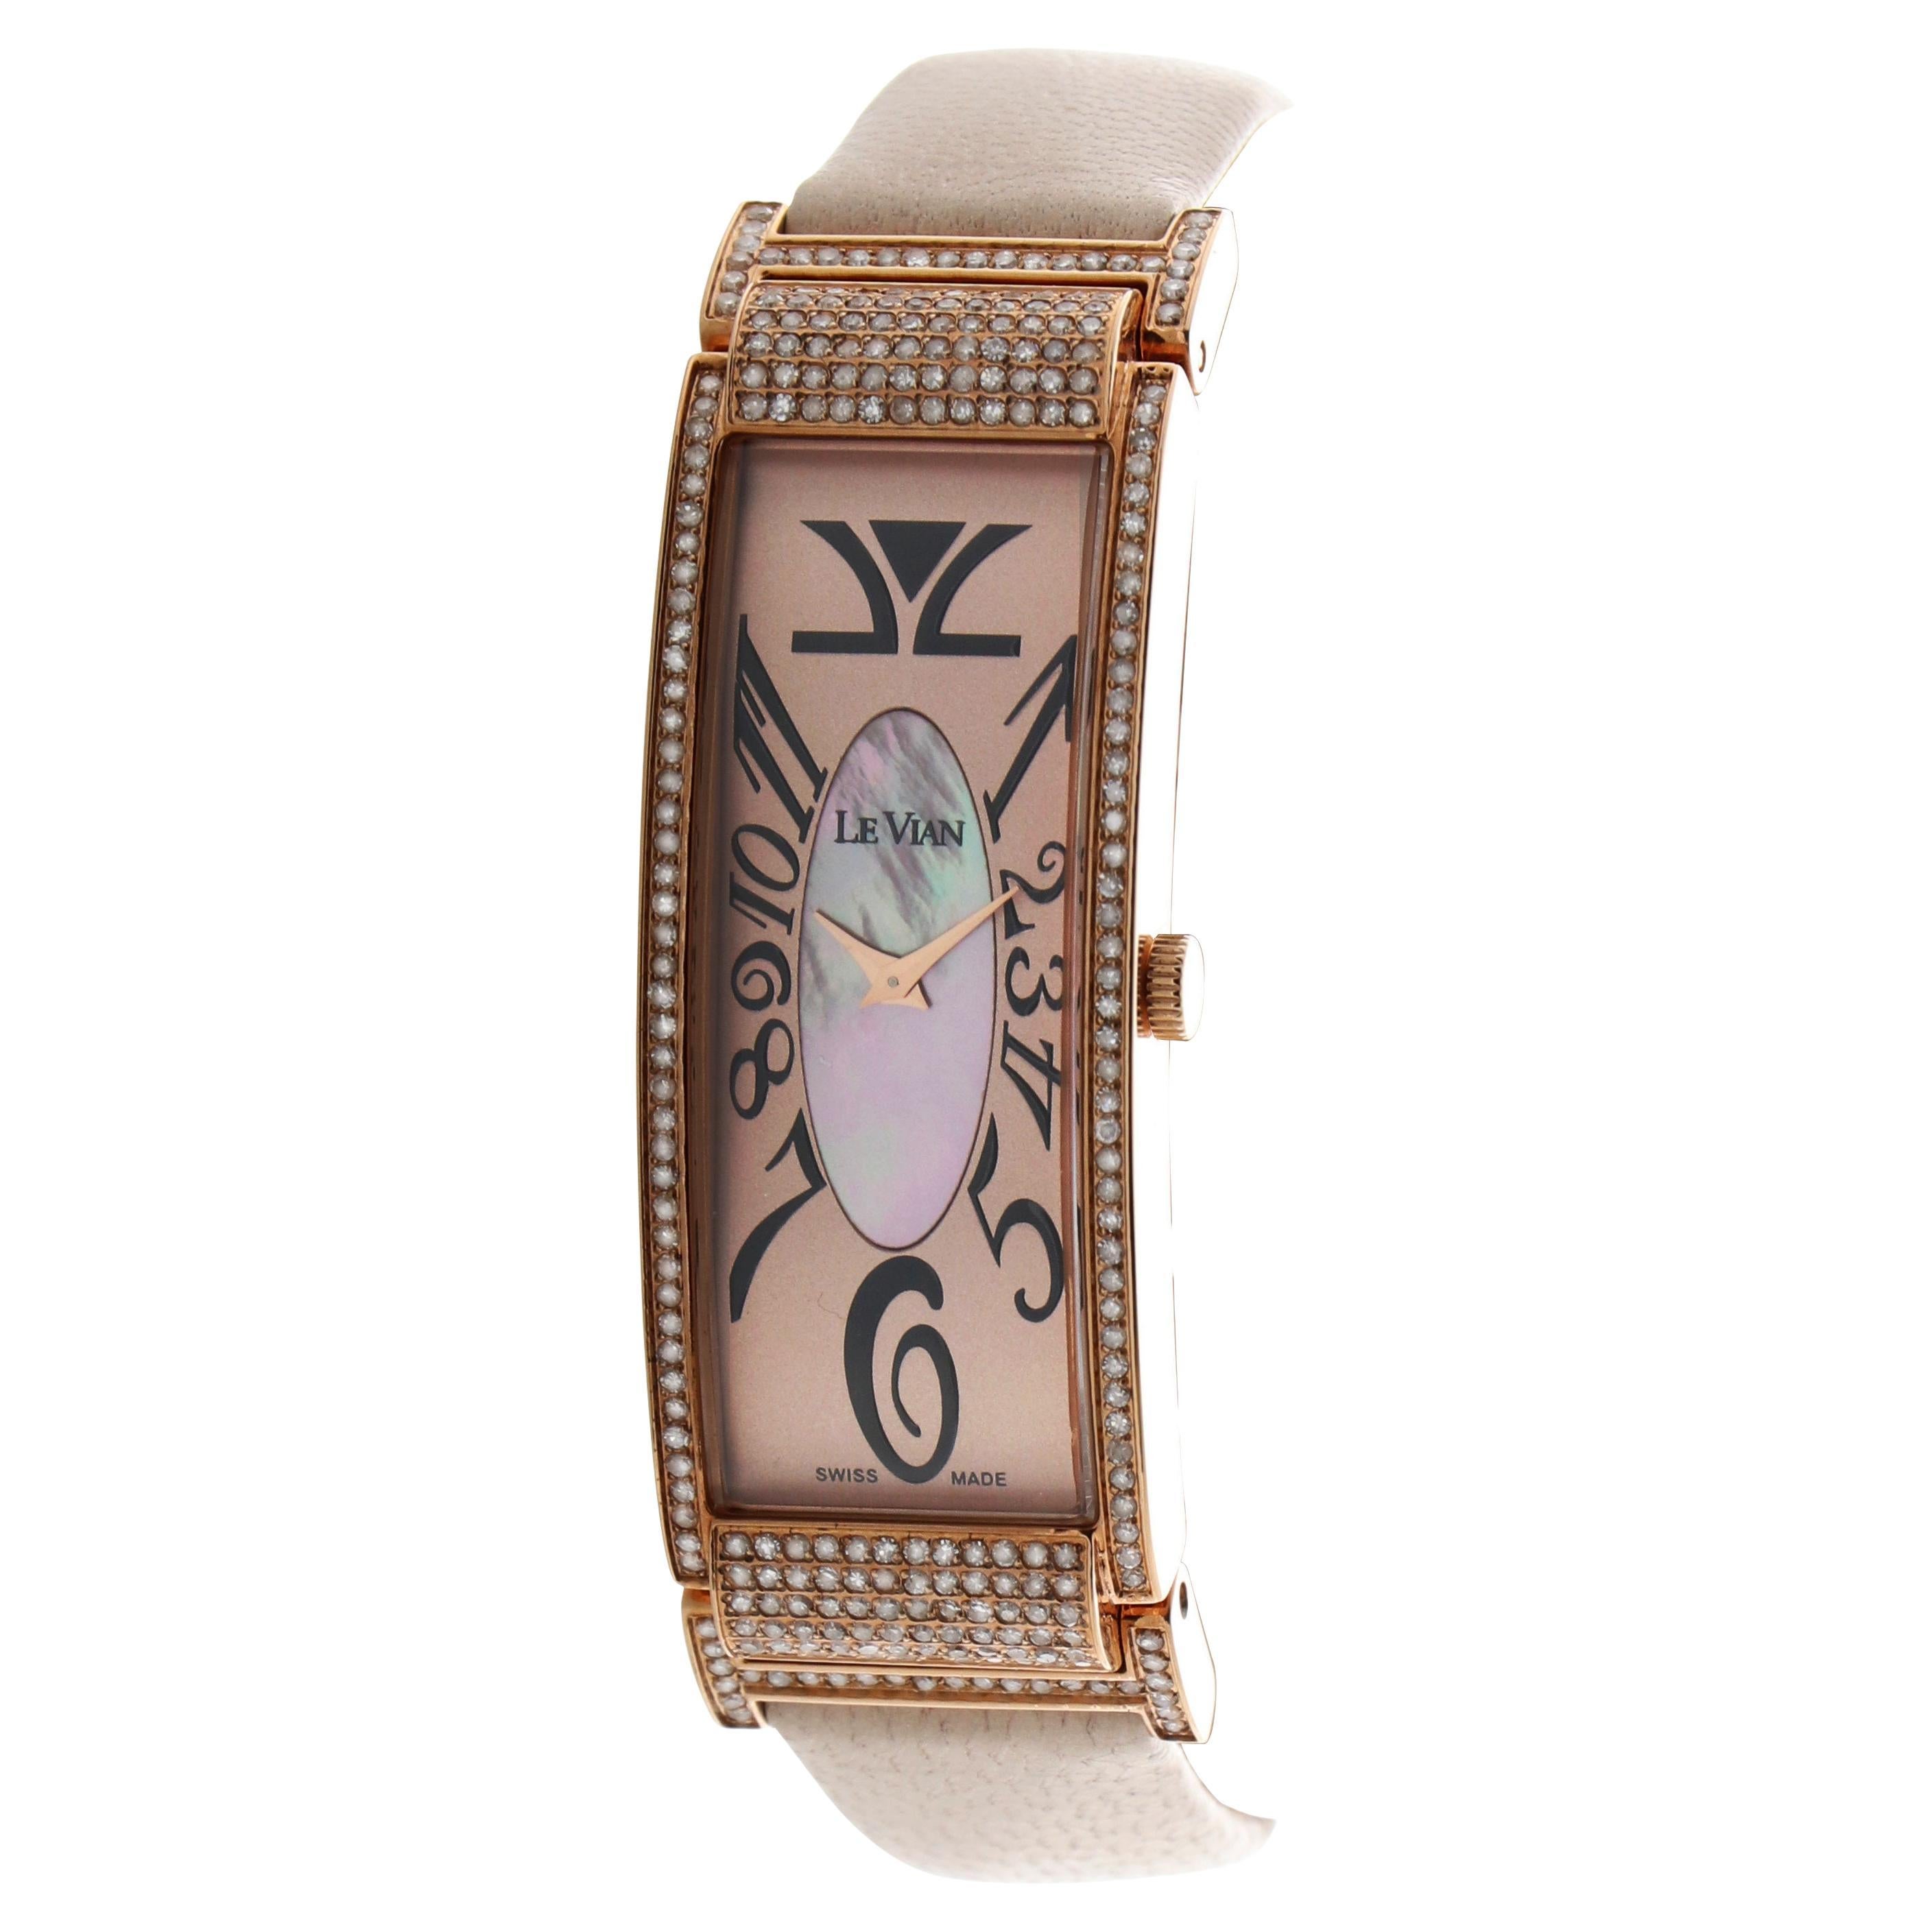 Le Vian Time Rectangle Watch Nude Diamonds in Stainless Steel